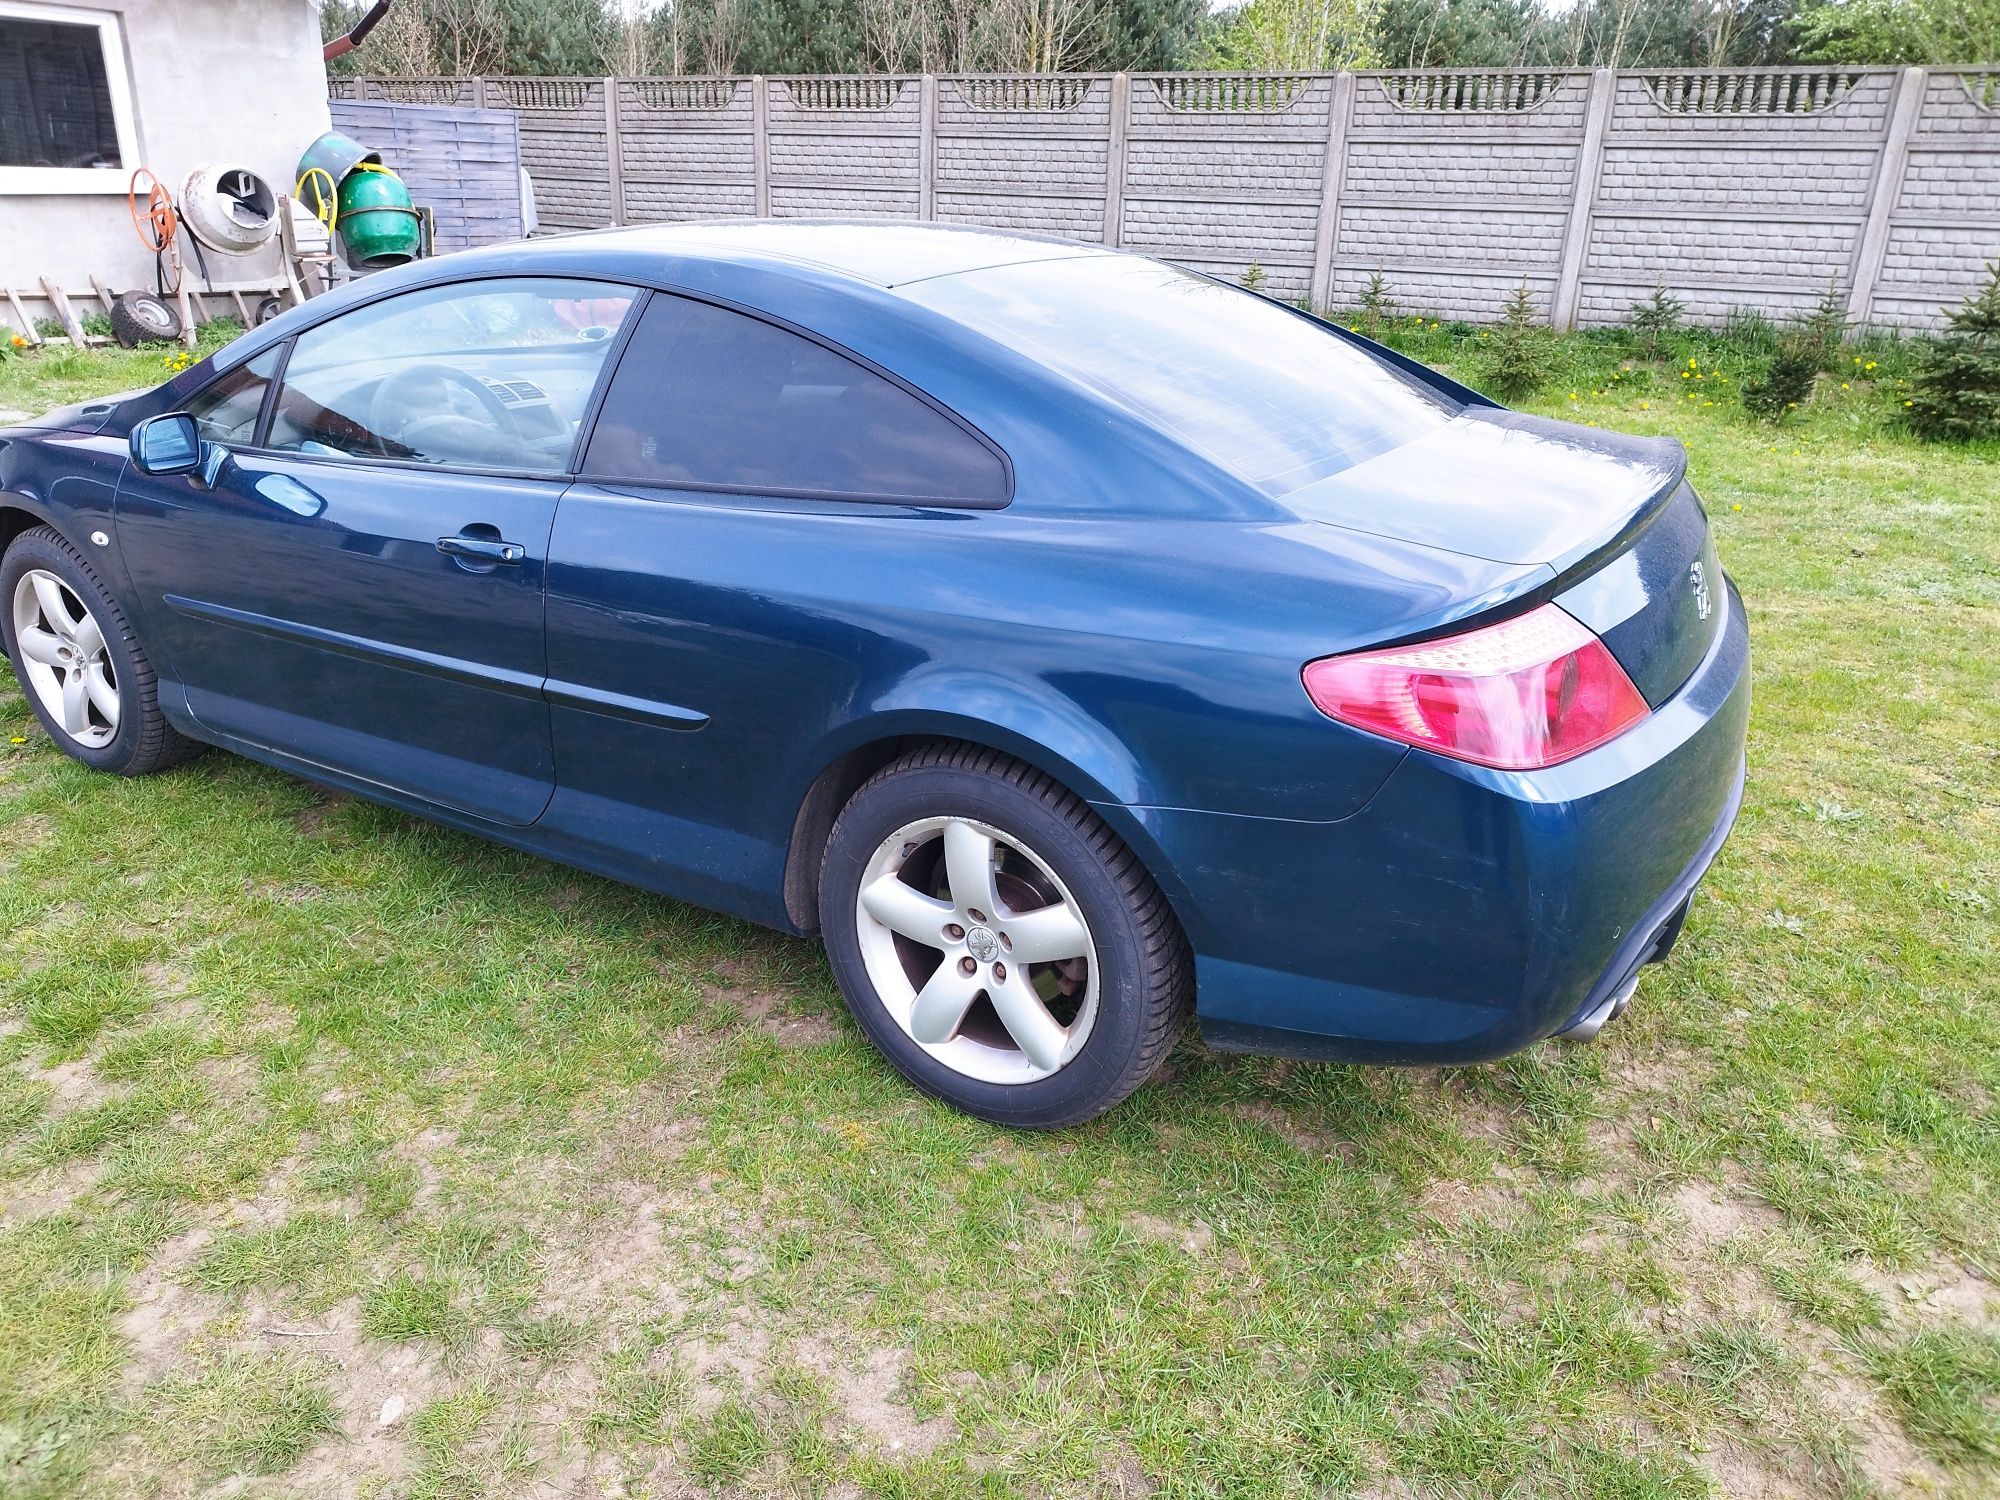 Peugeot 407 Coupe 2.0 HDI